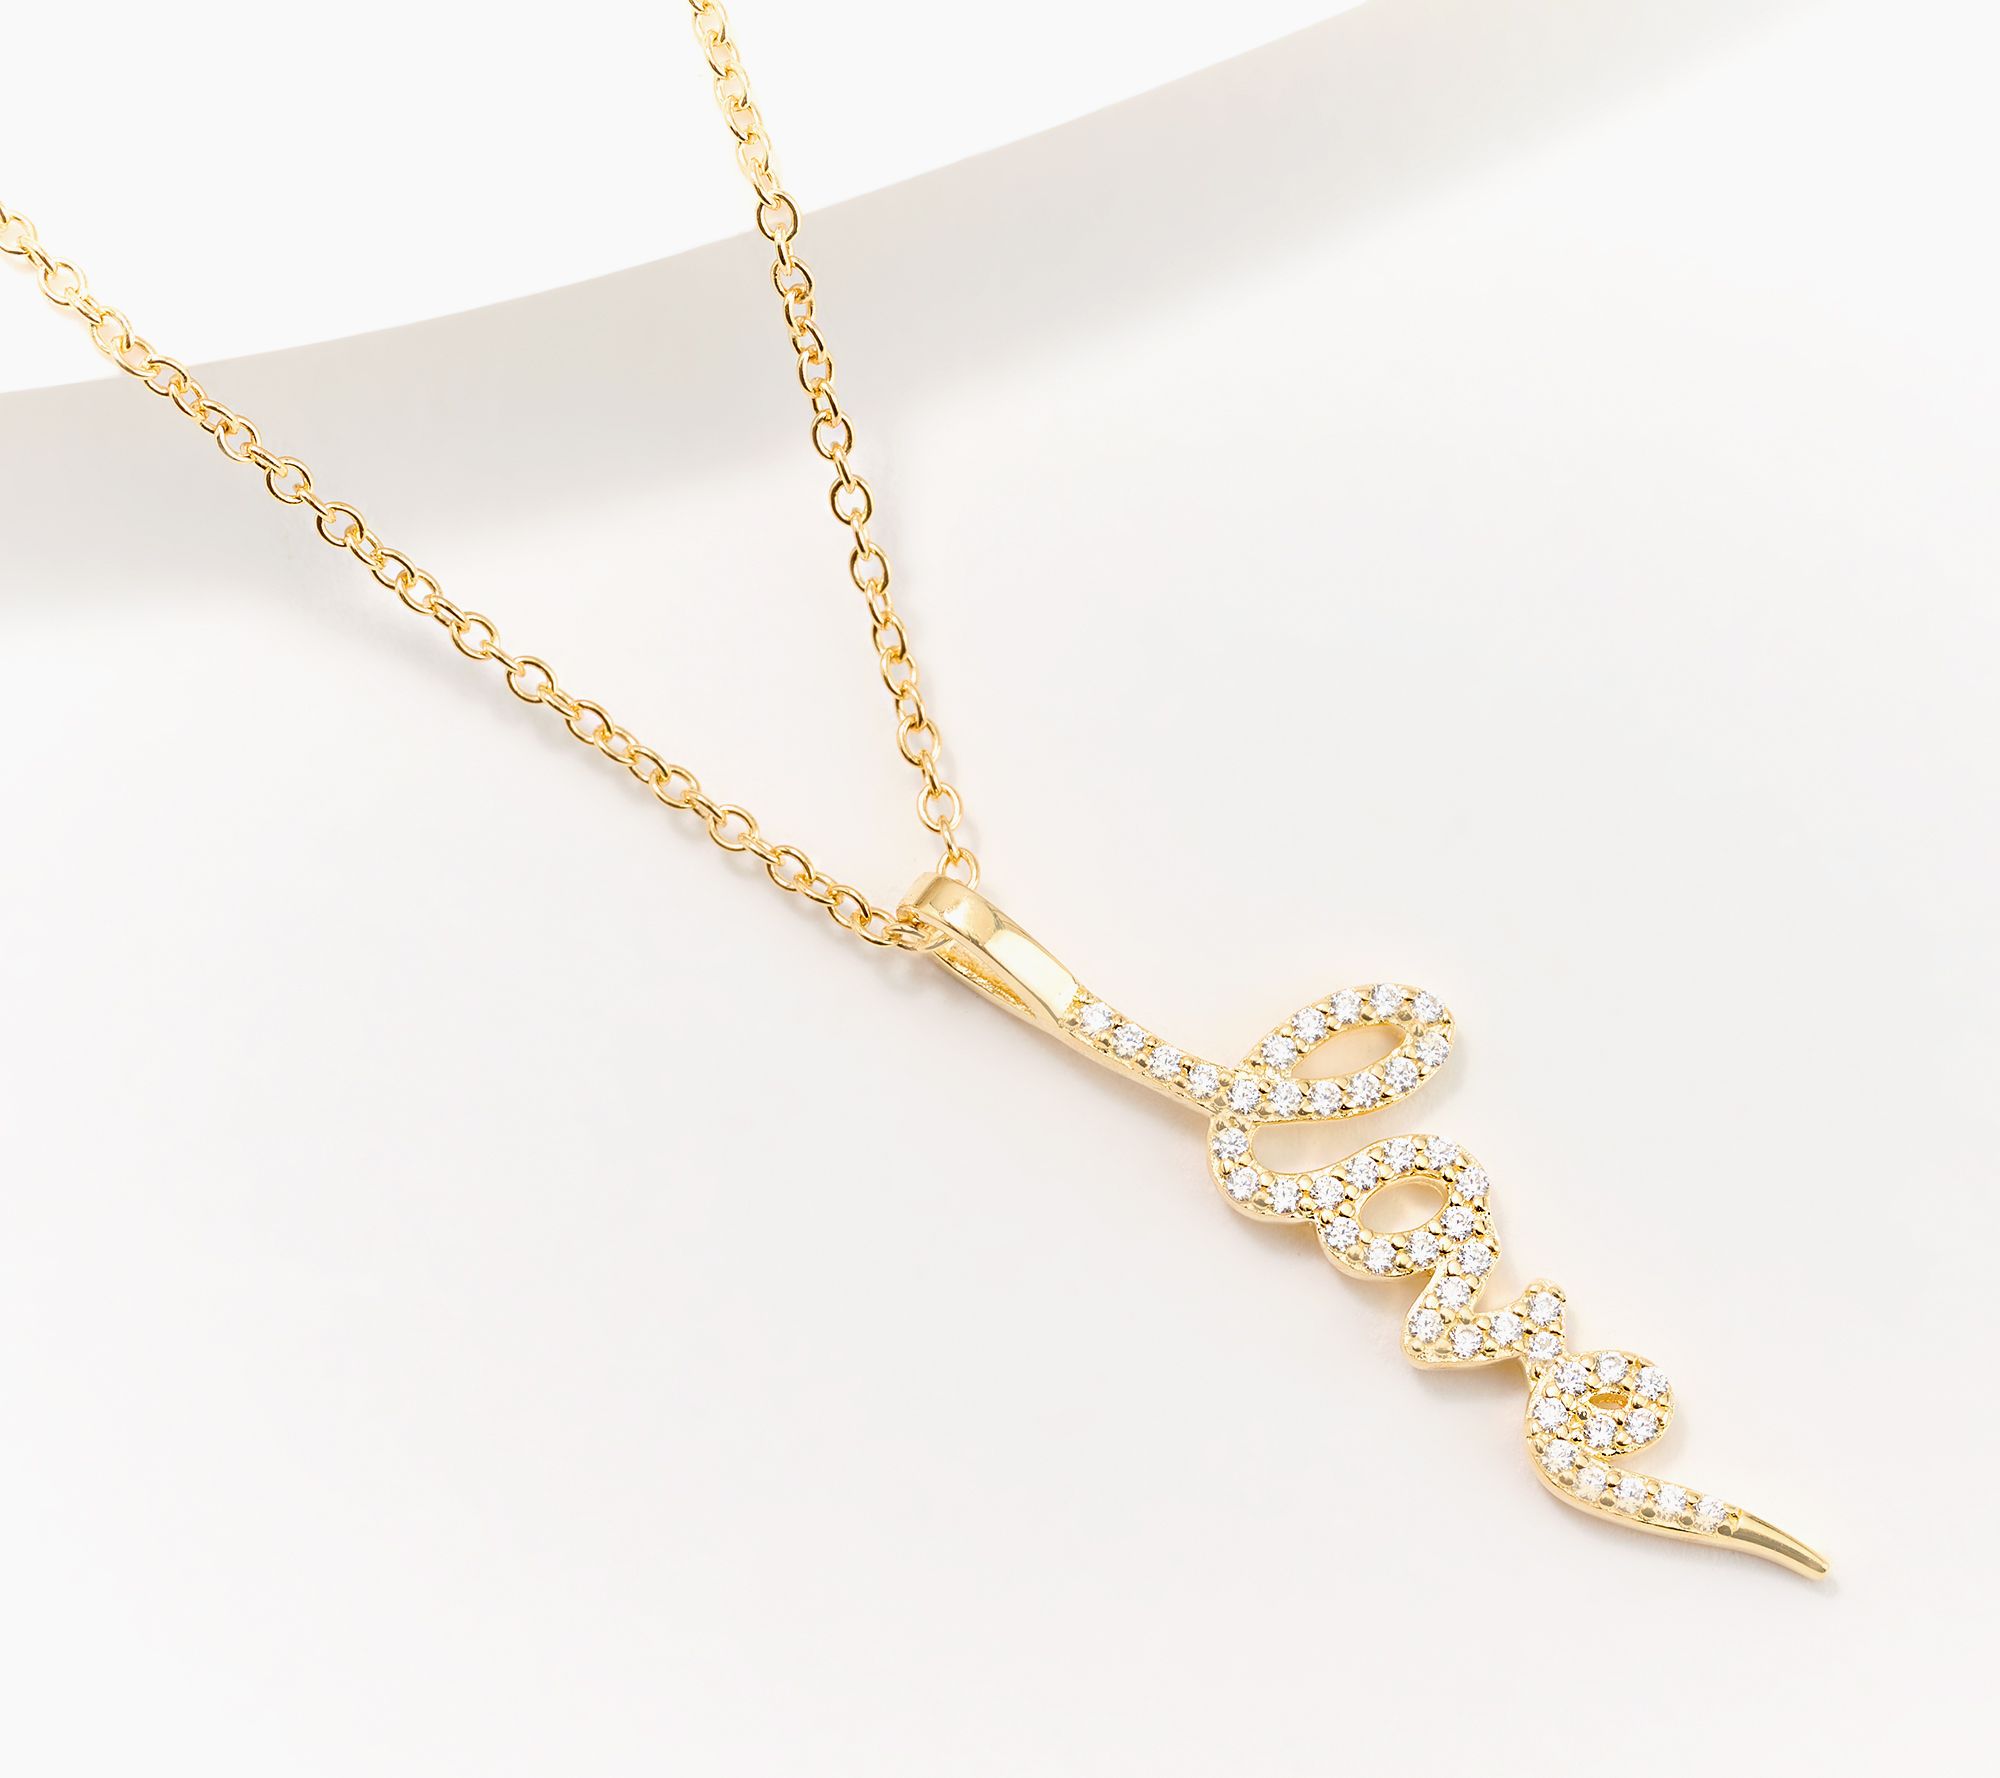 J.HOFFMAN'S Tiny Love Thin Chain Necklace